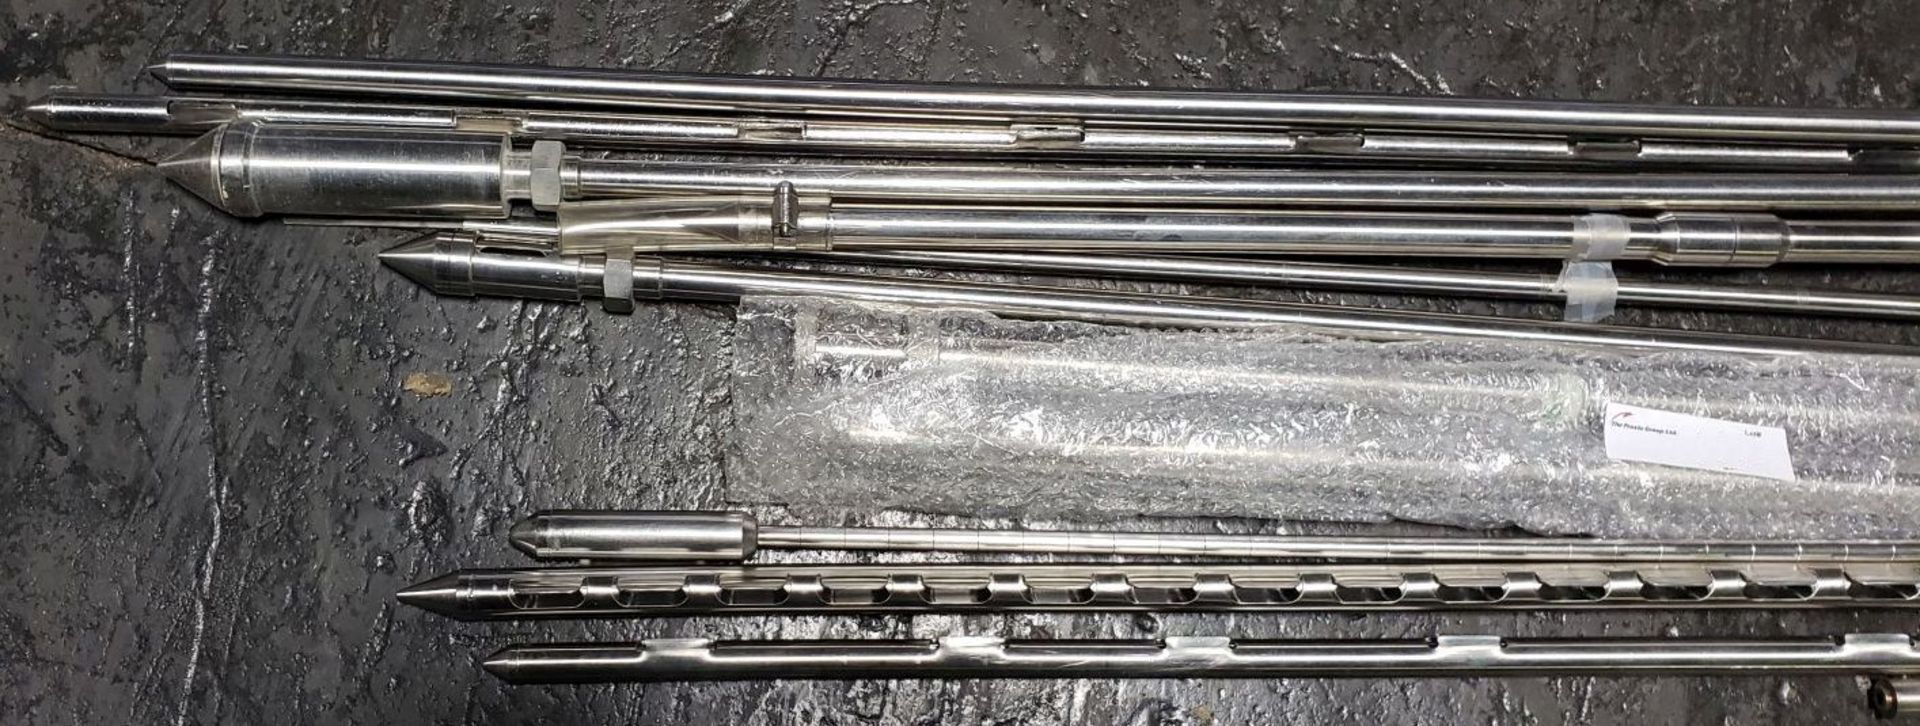 Lot of Stainless Steel Sample Theives, as pictured - Image 5 of 5